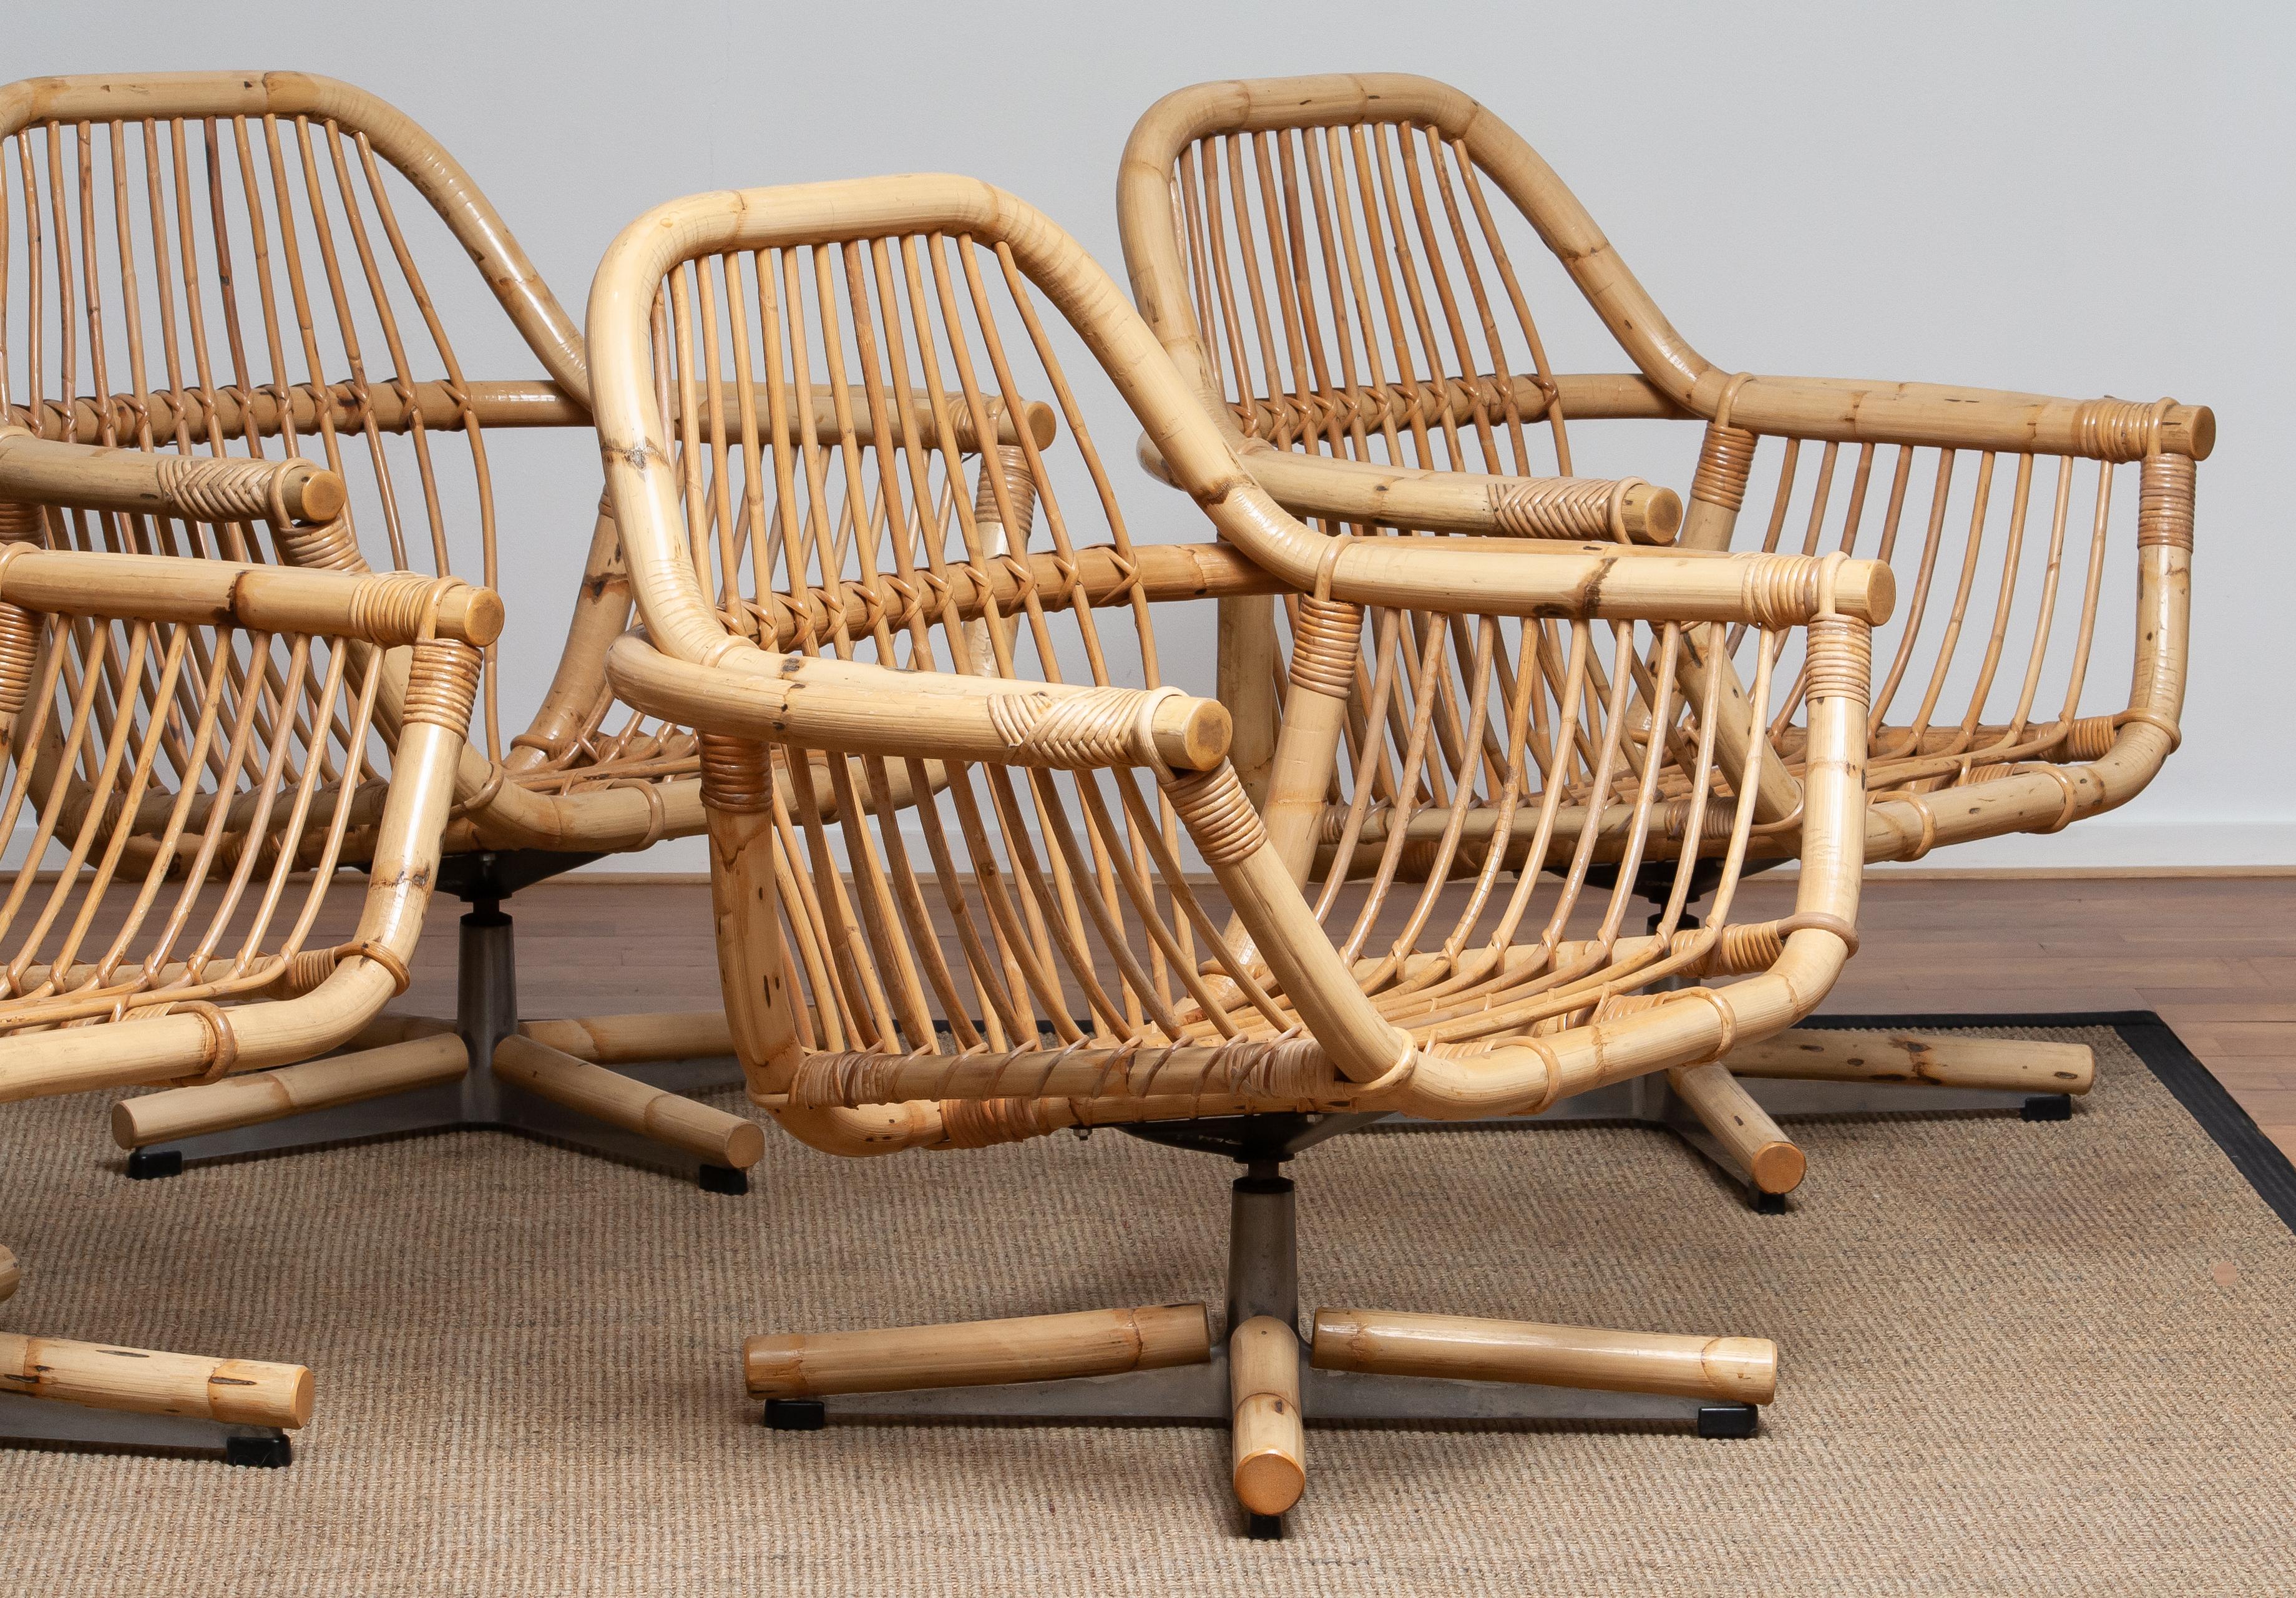 Mid-20th Century 1960s Rattan Garden Set / Lounge Set Consist Five Swivel Chairs and Coffee Table